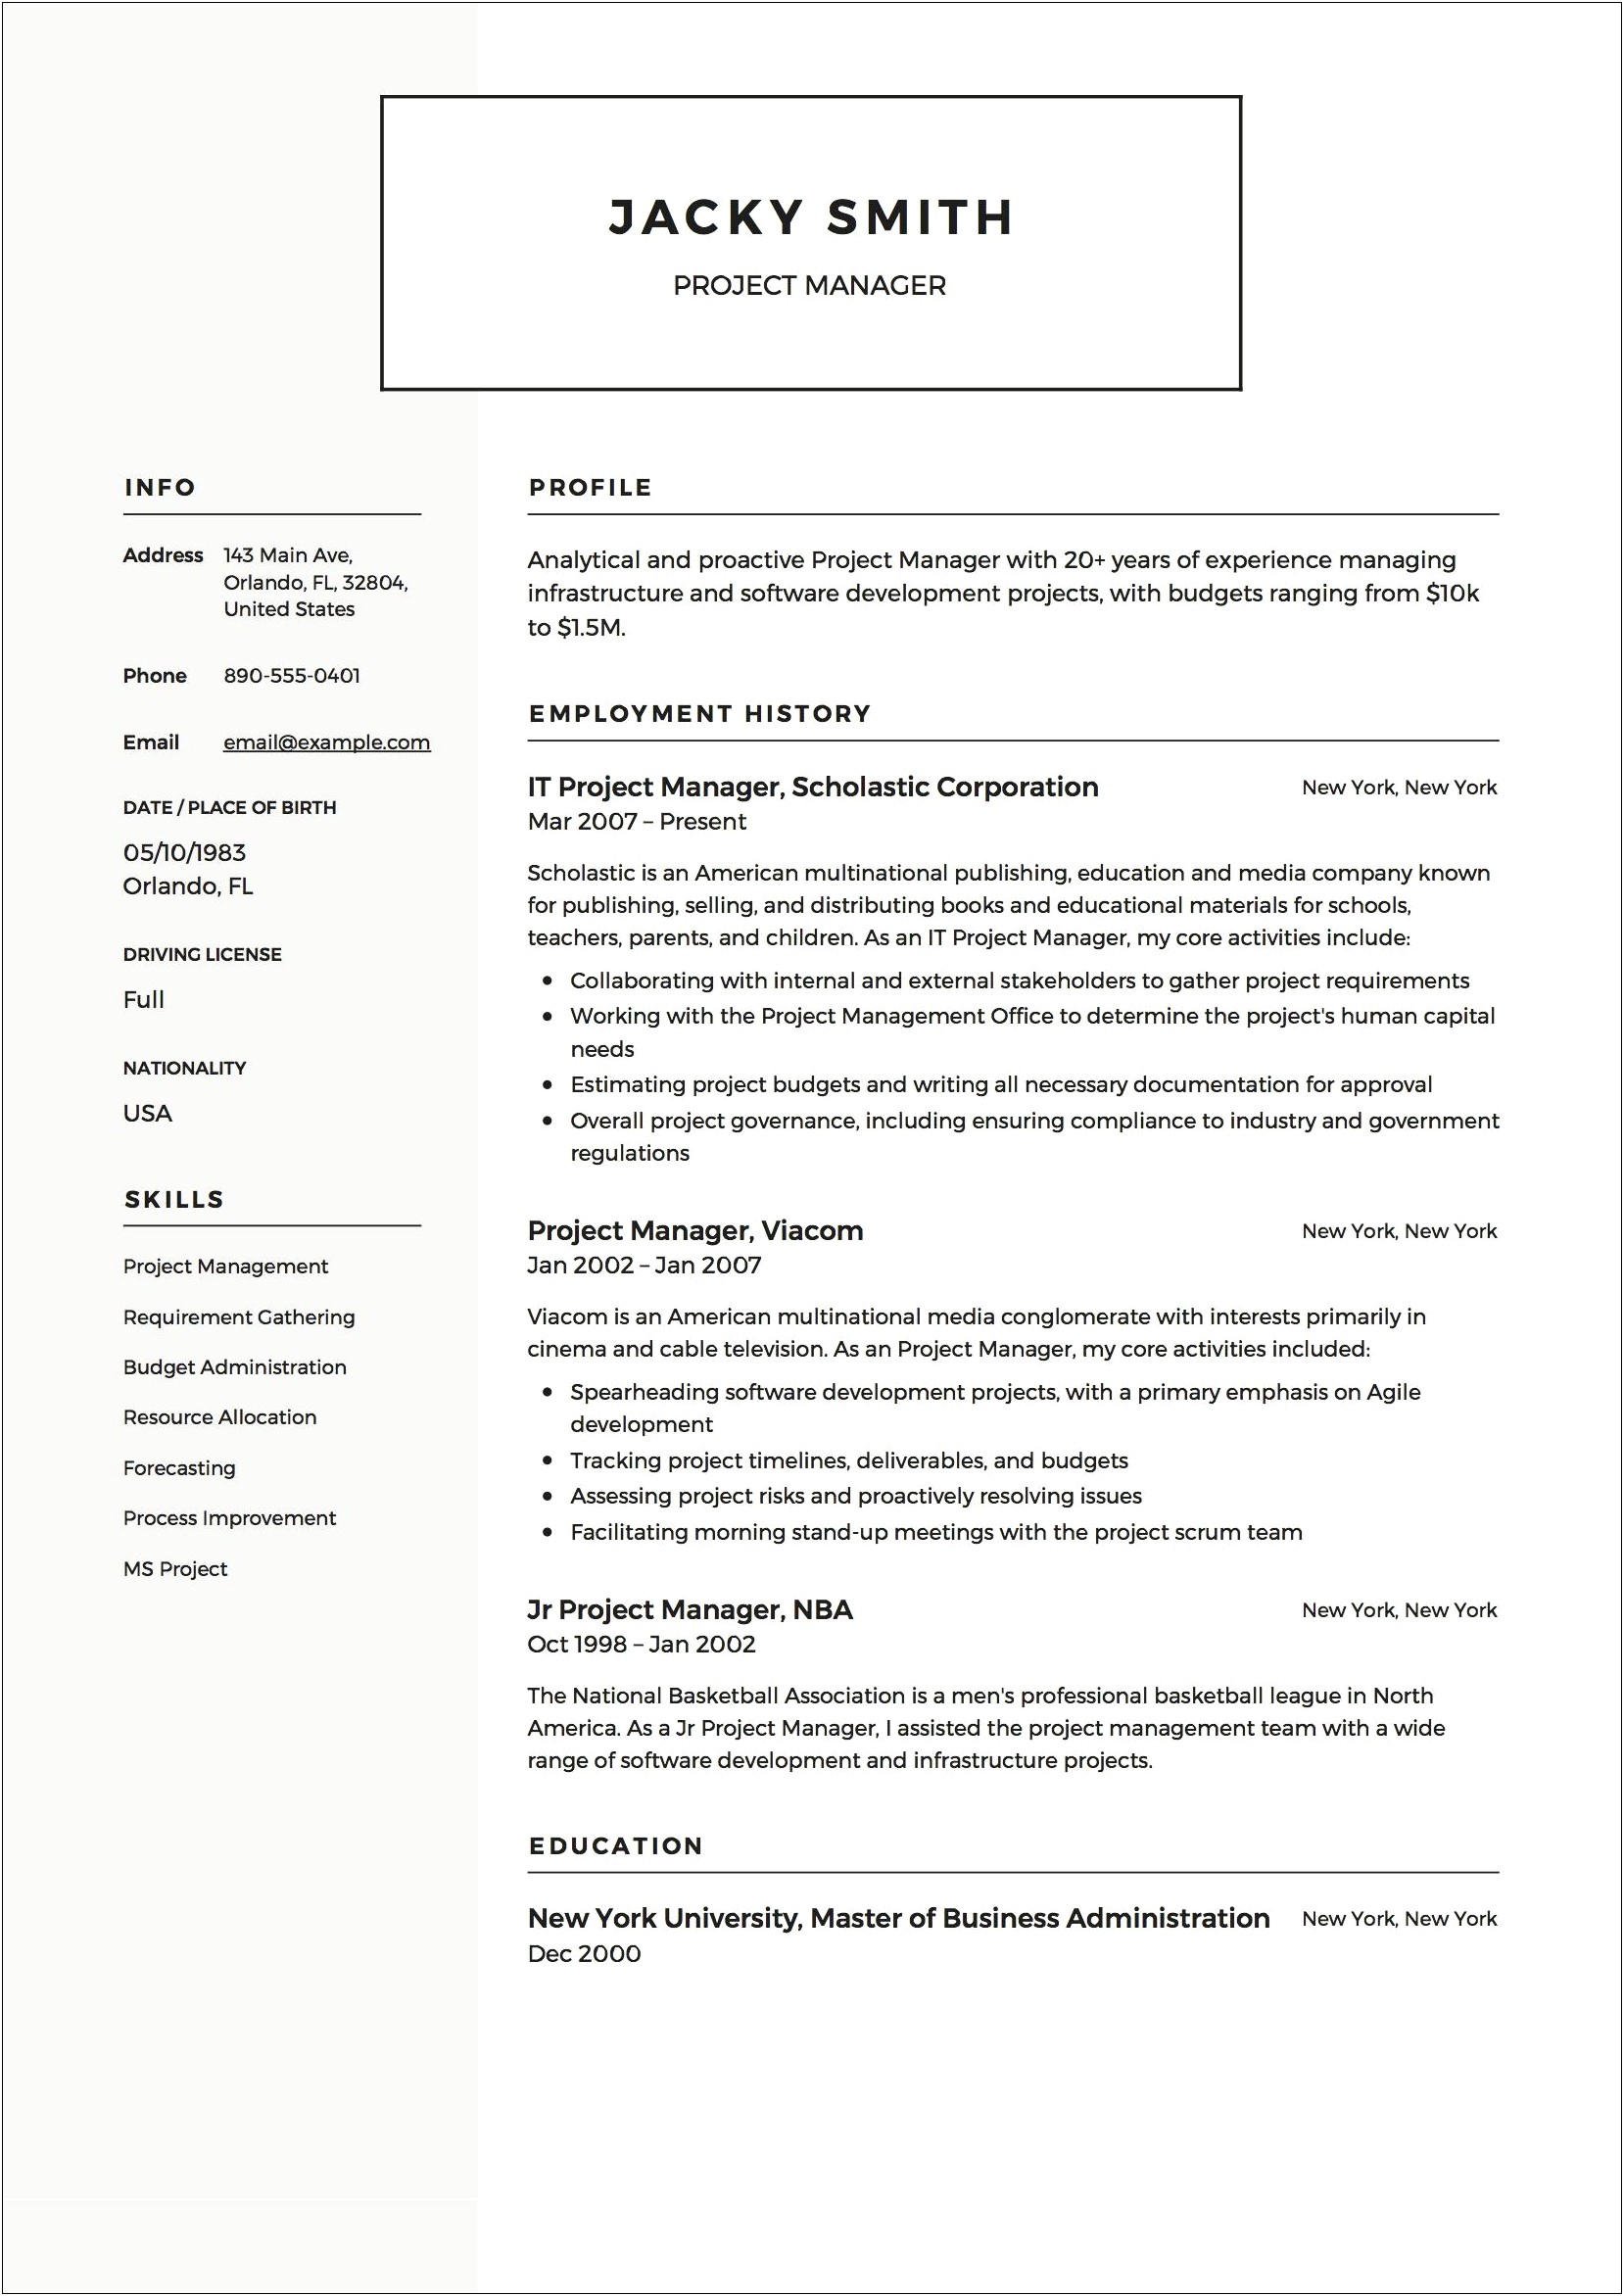 Functional Resume Samples For Project Management